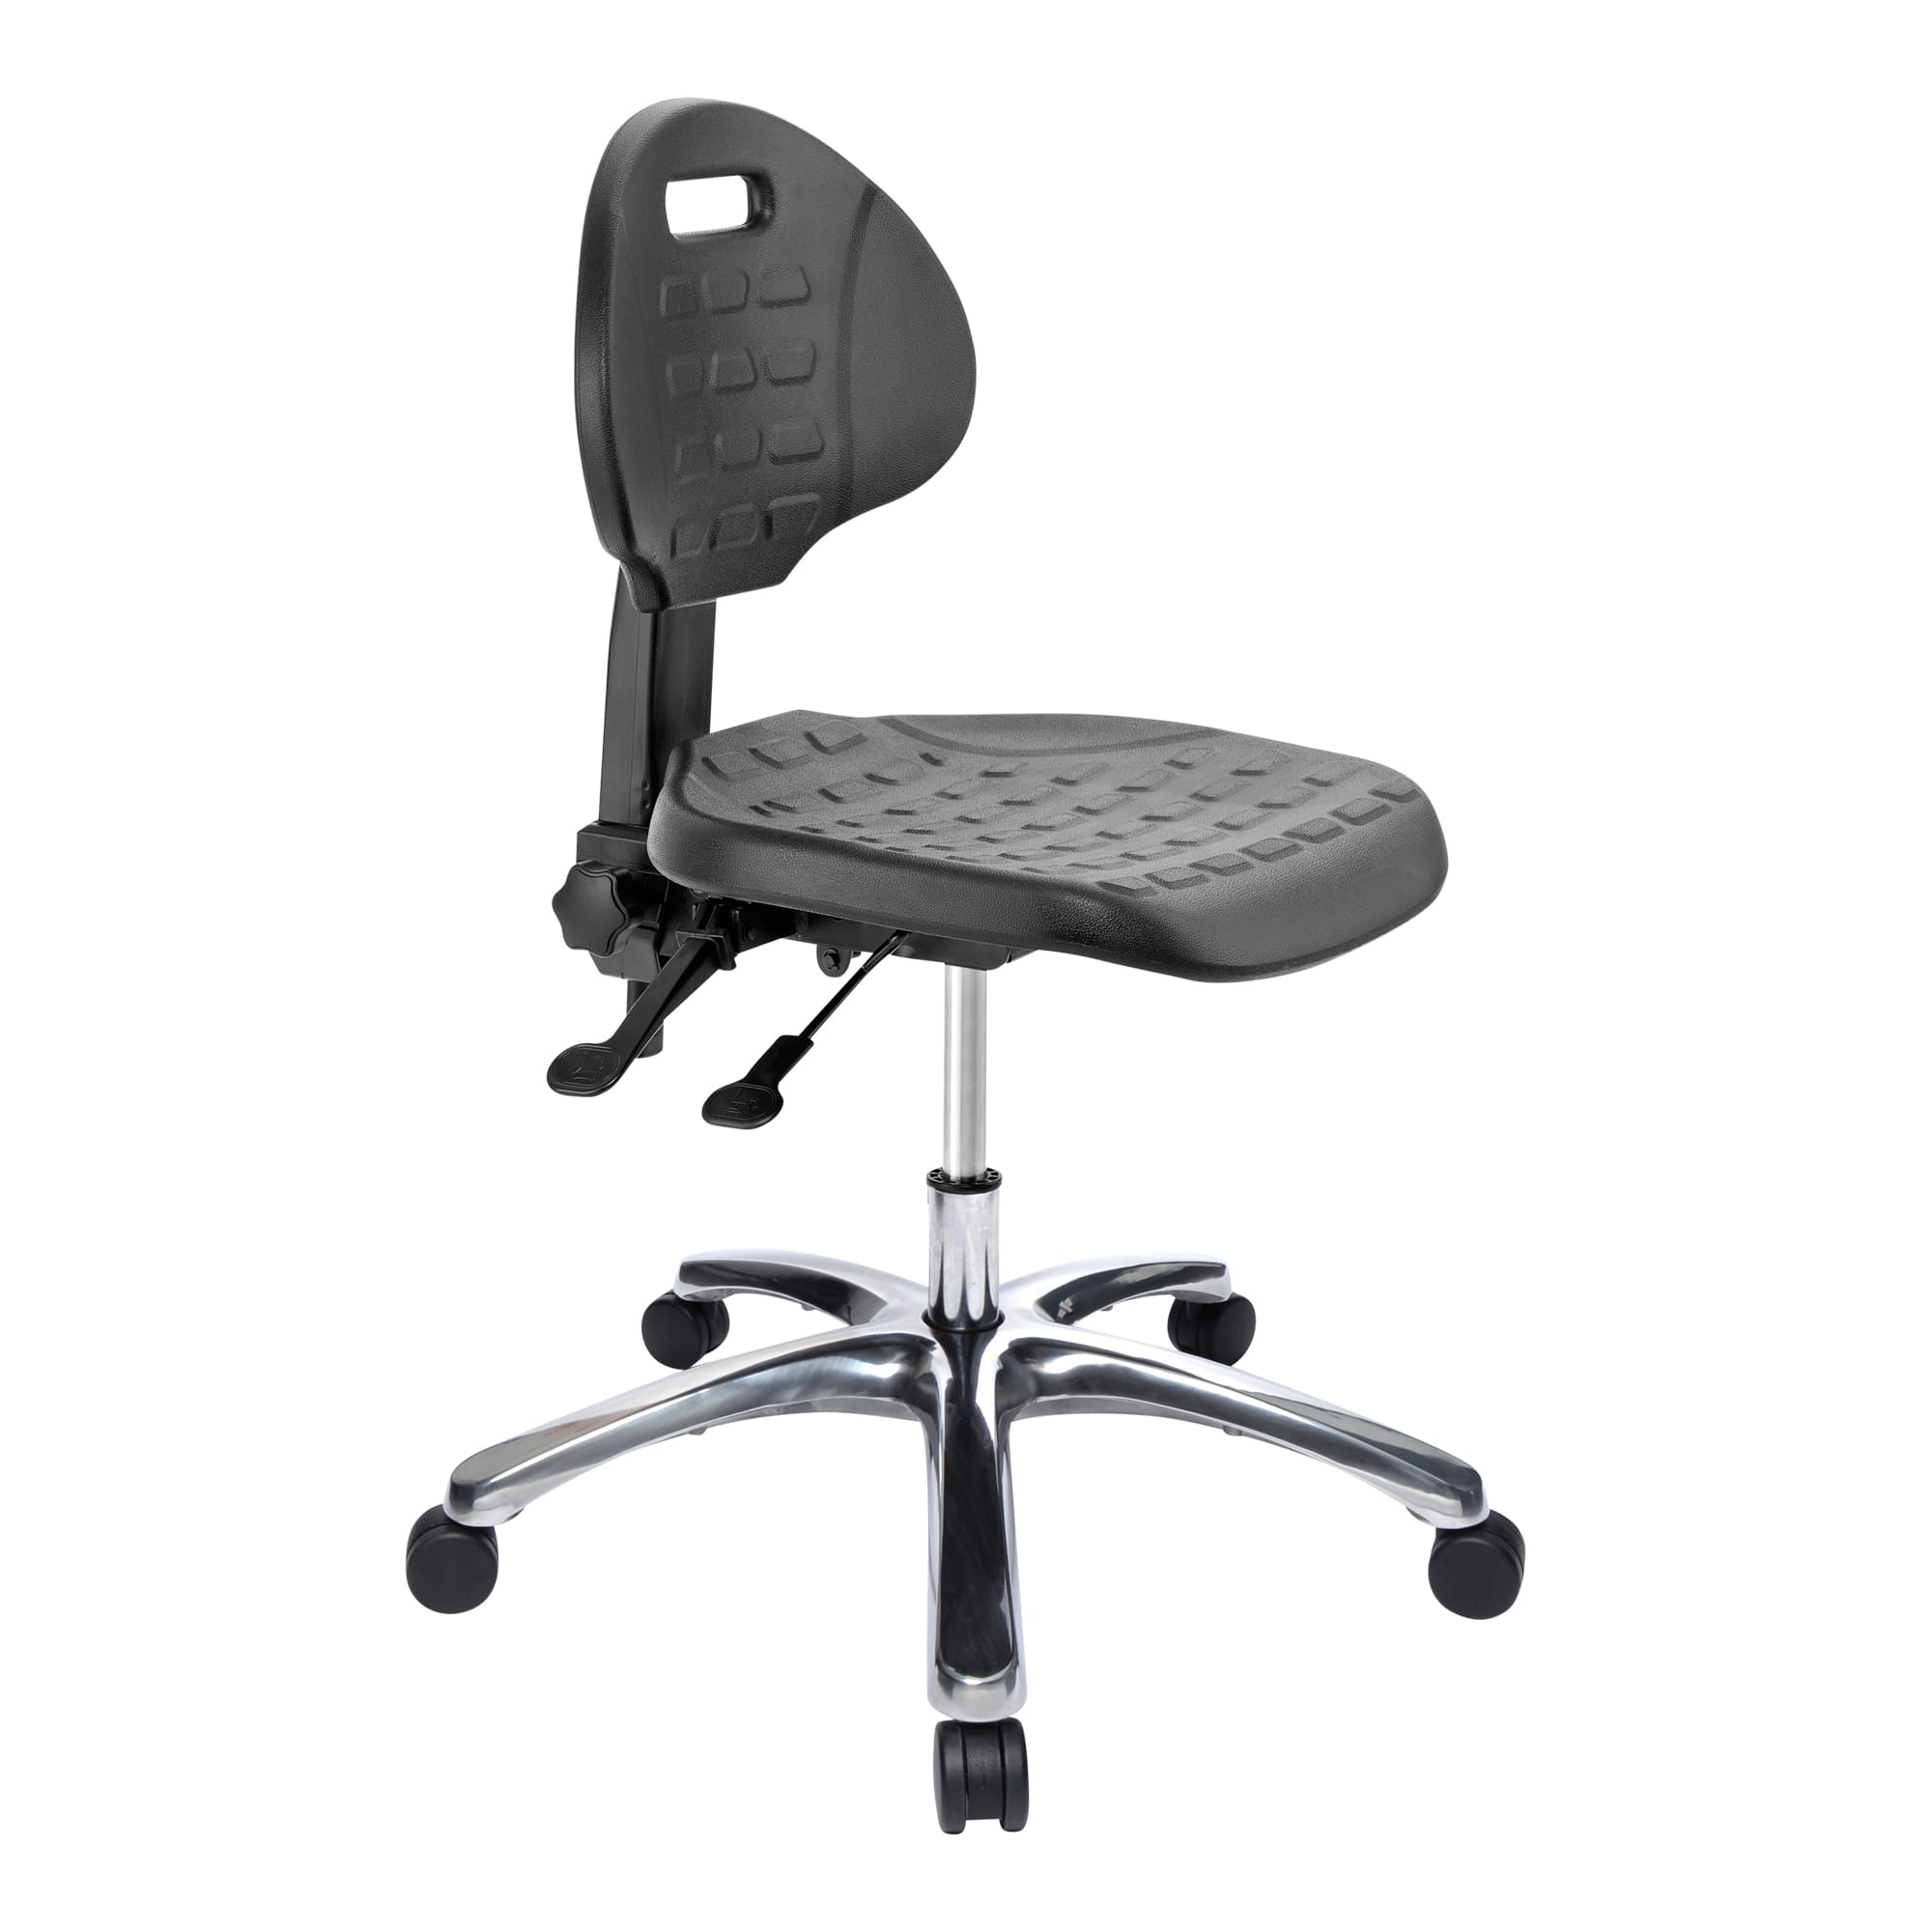 Medical Chairs - Find Healthcare Seating in NZ | Buro